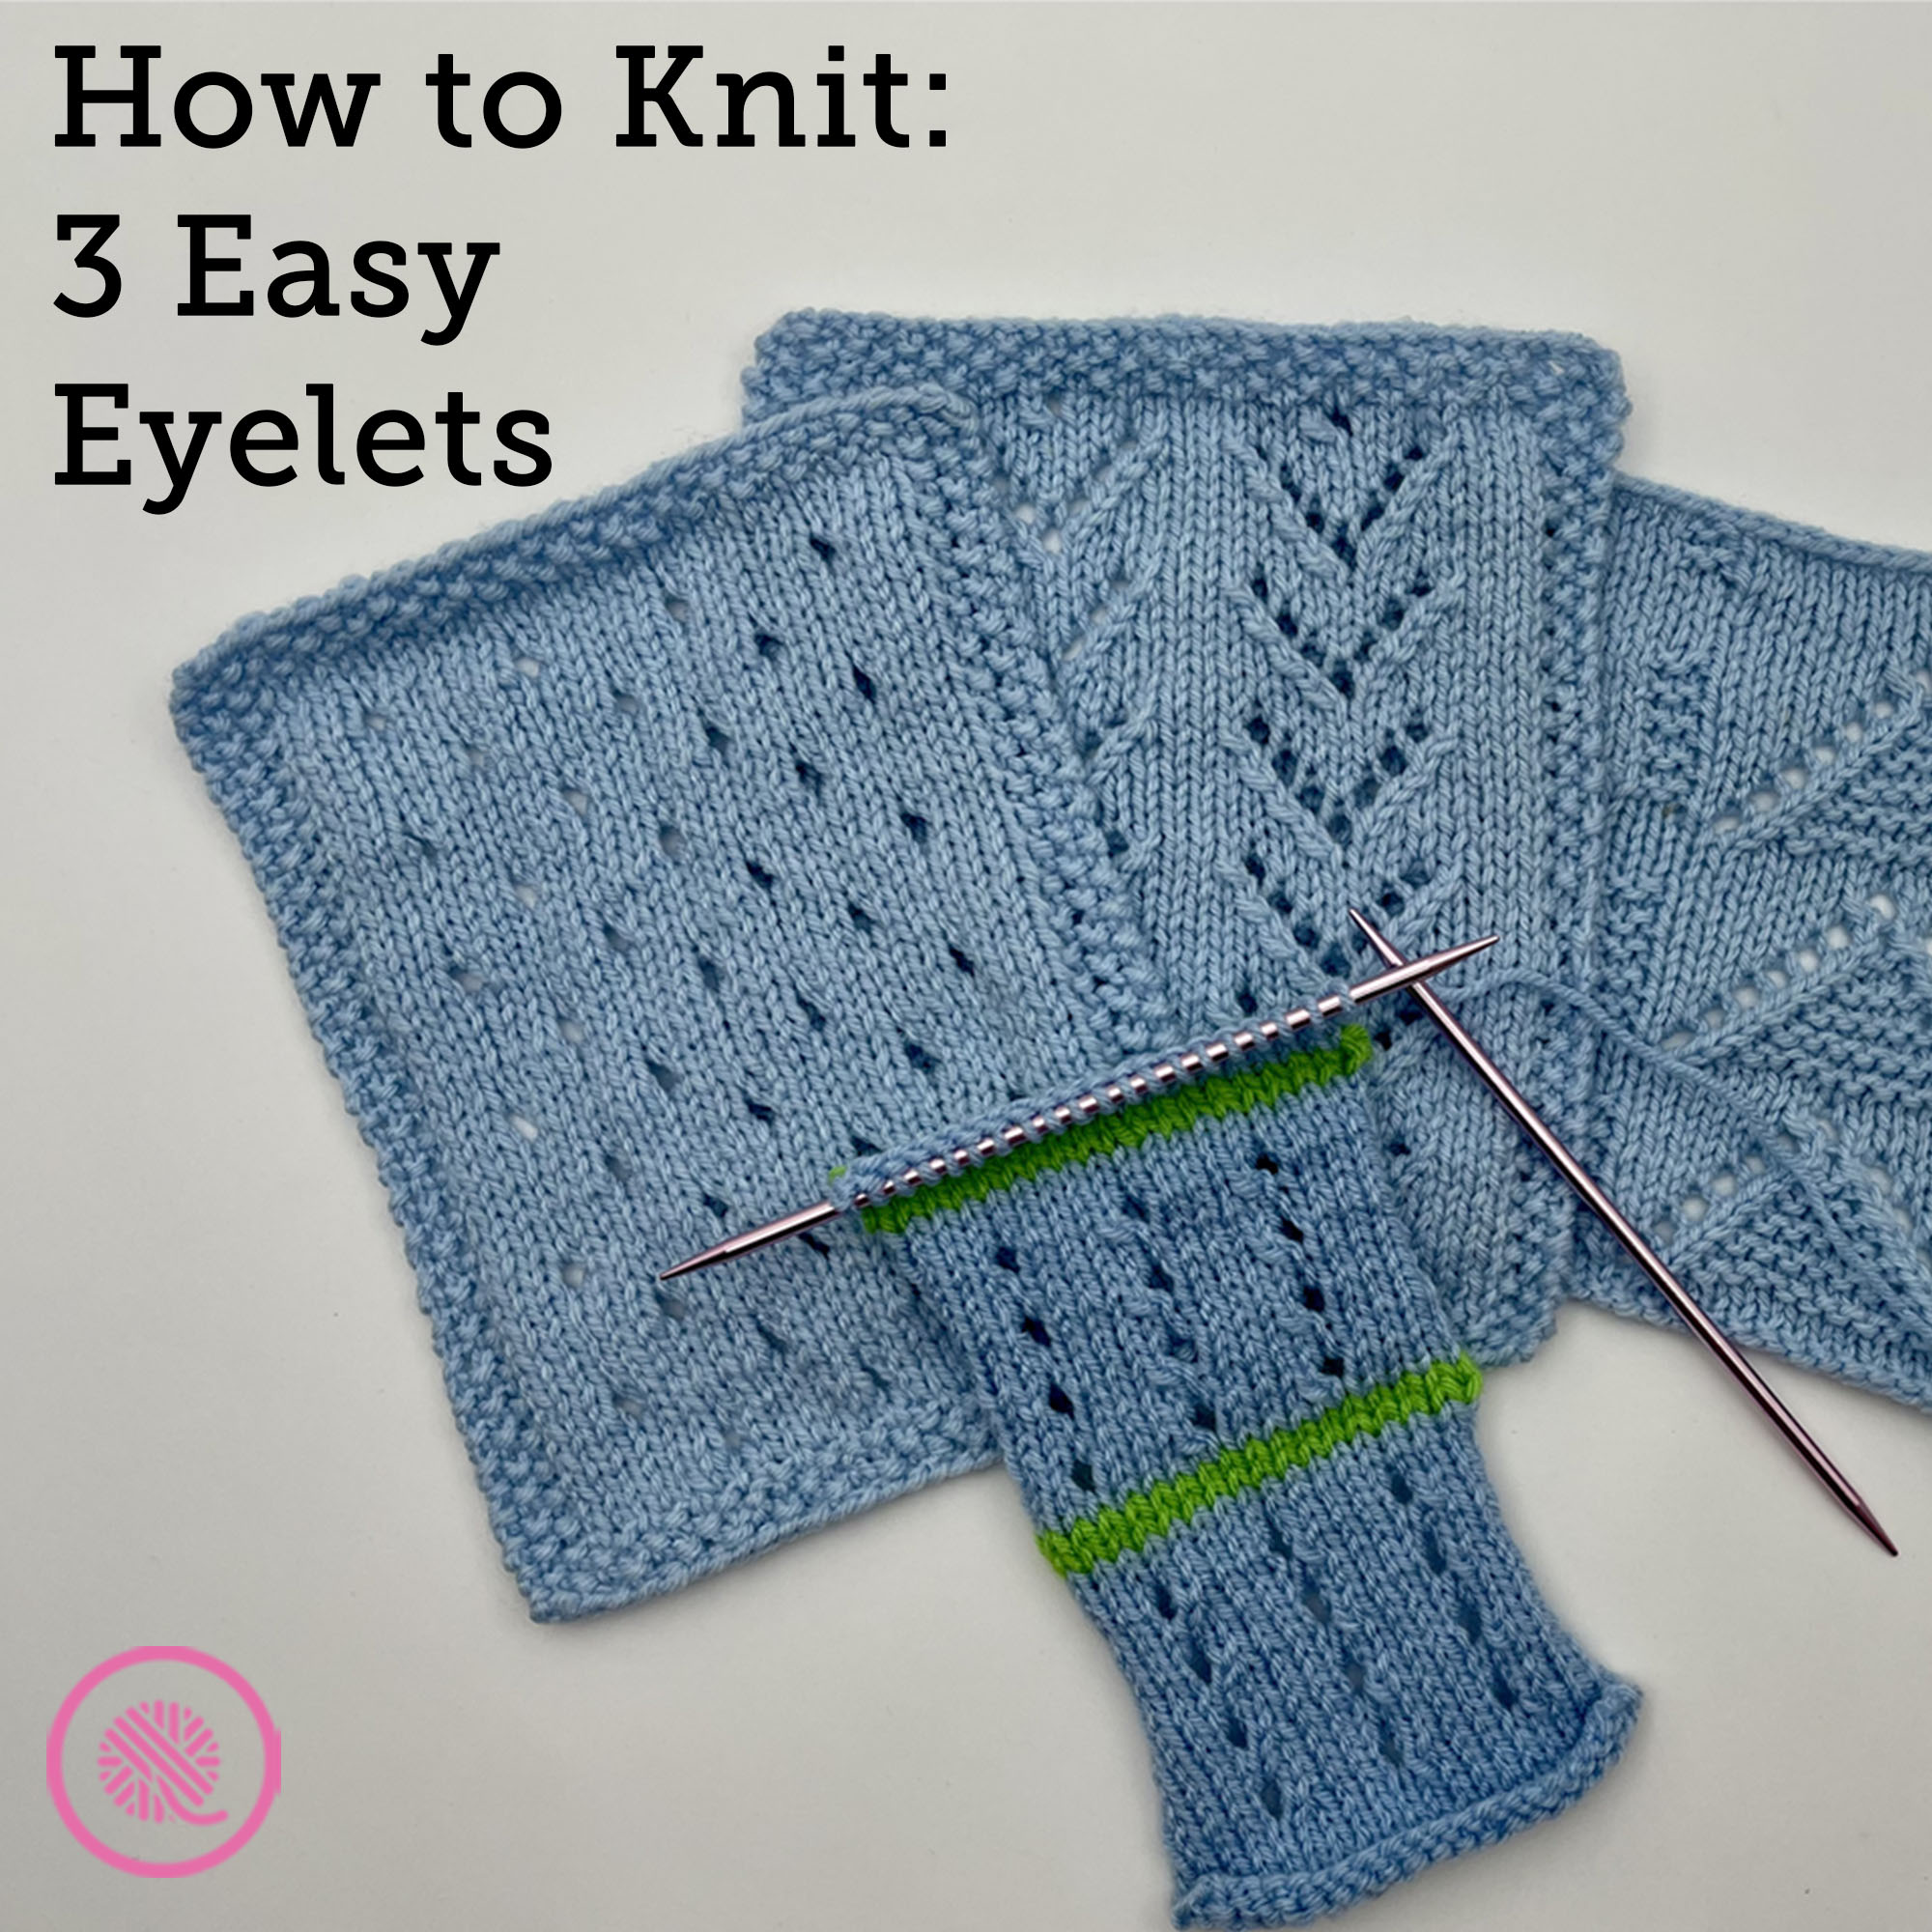 3 Easy Knitting Projects for Beginner Knitters